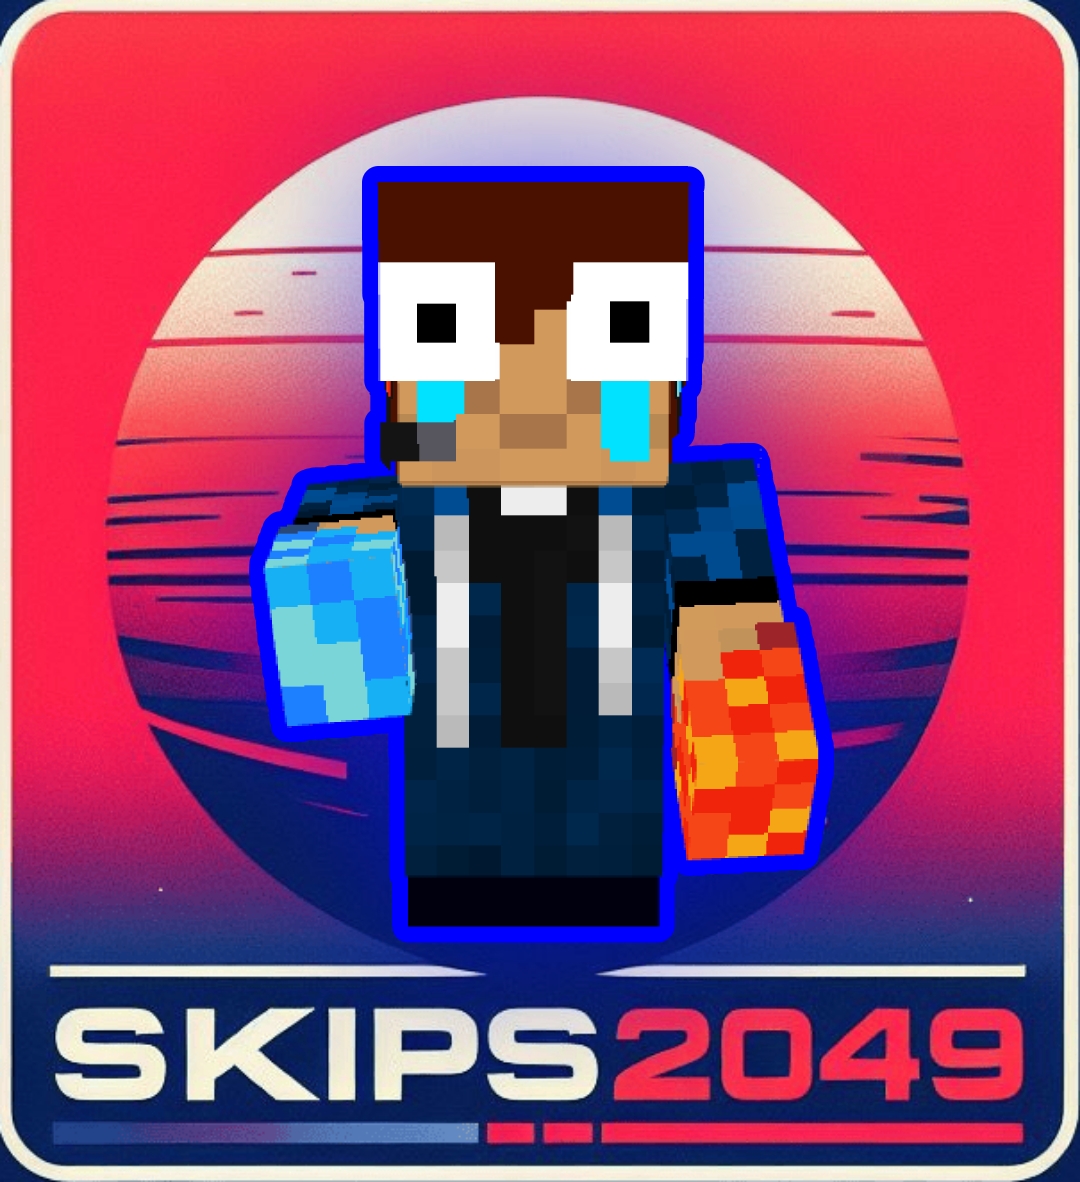 Profile picture of skips2049 on PvPRP